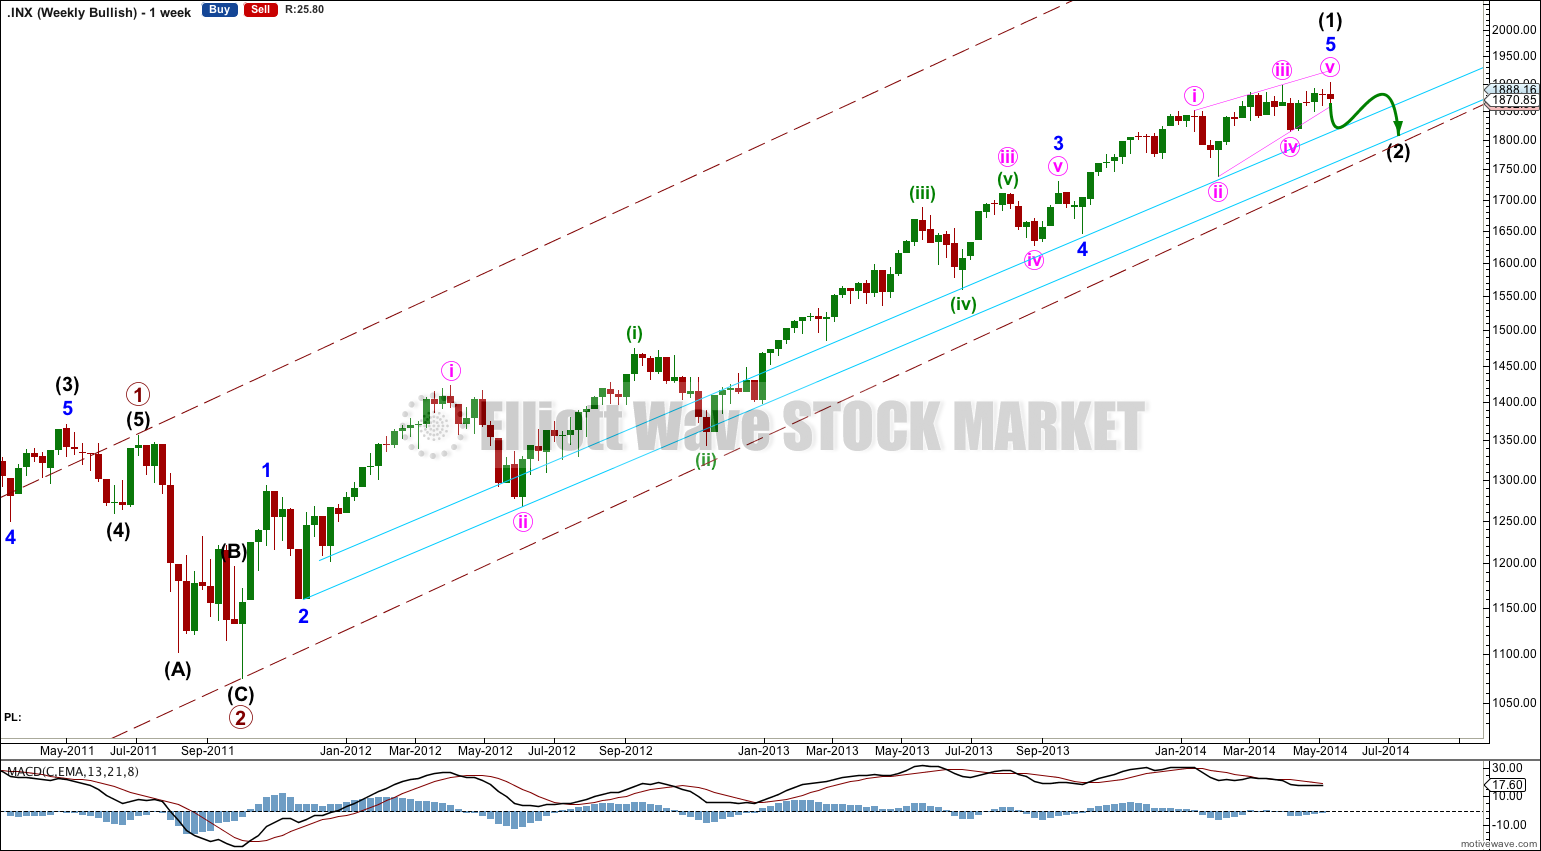 S&P 500 weekly 2014